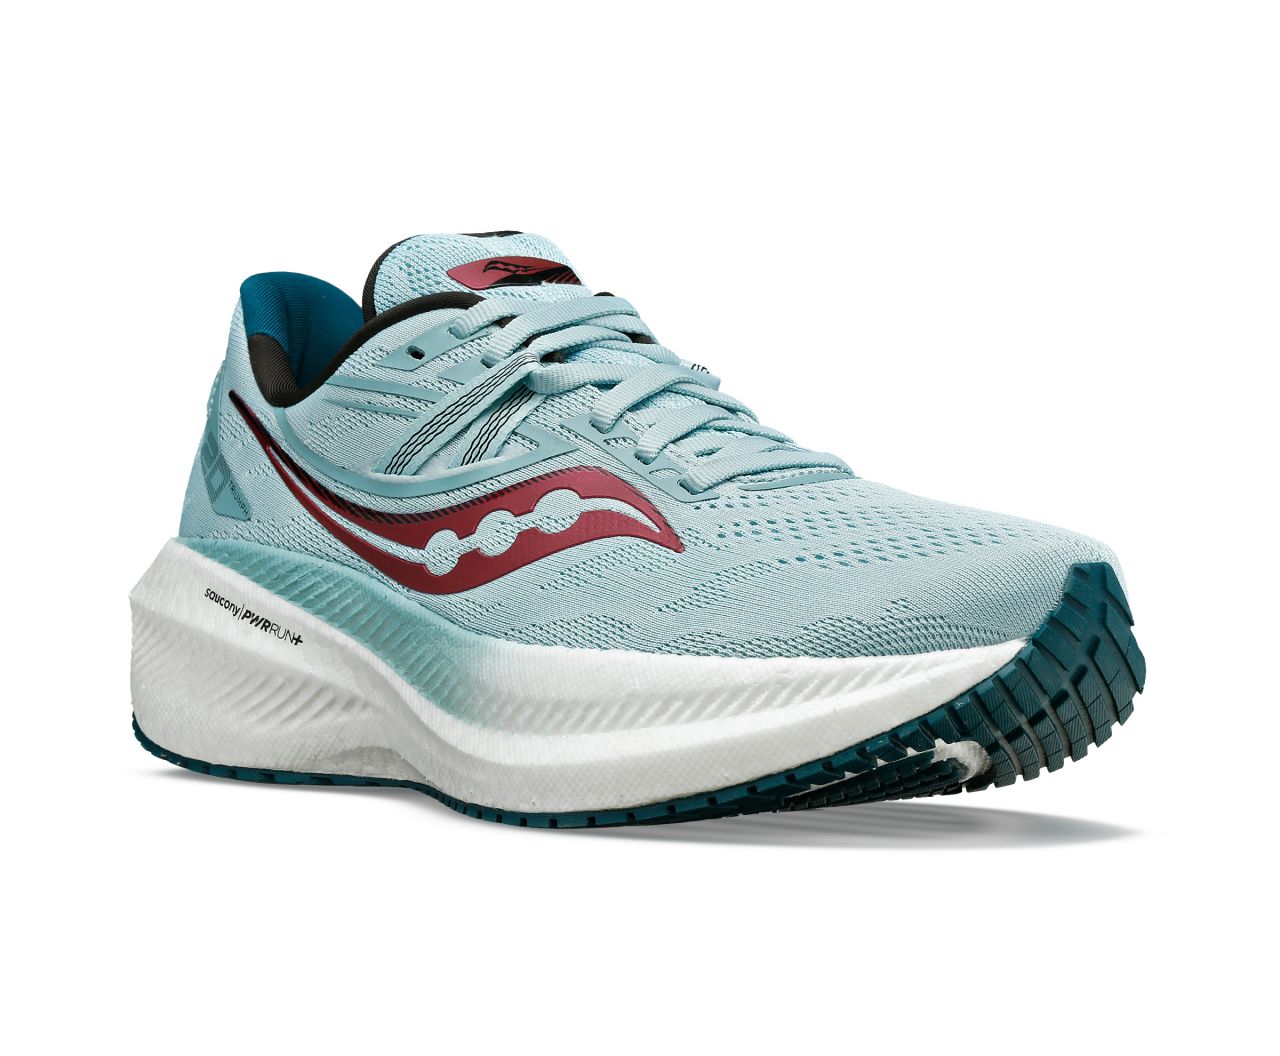 SAUCONY TRIUMPH 20 MINERAL ET BERRY Chaussures running saucony